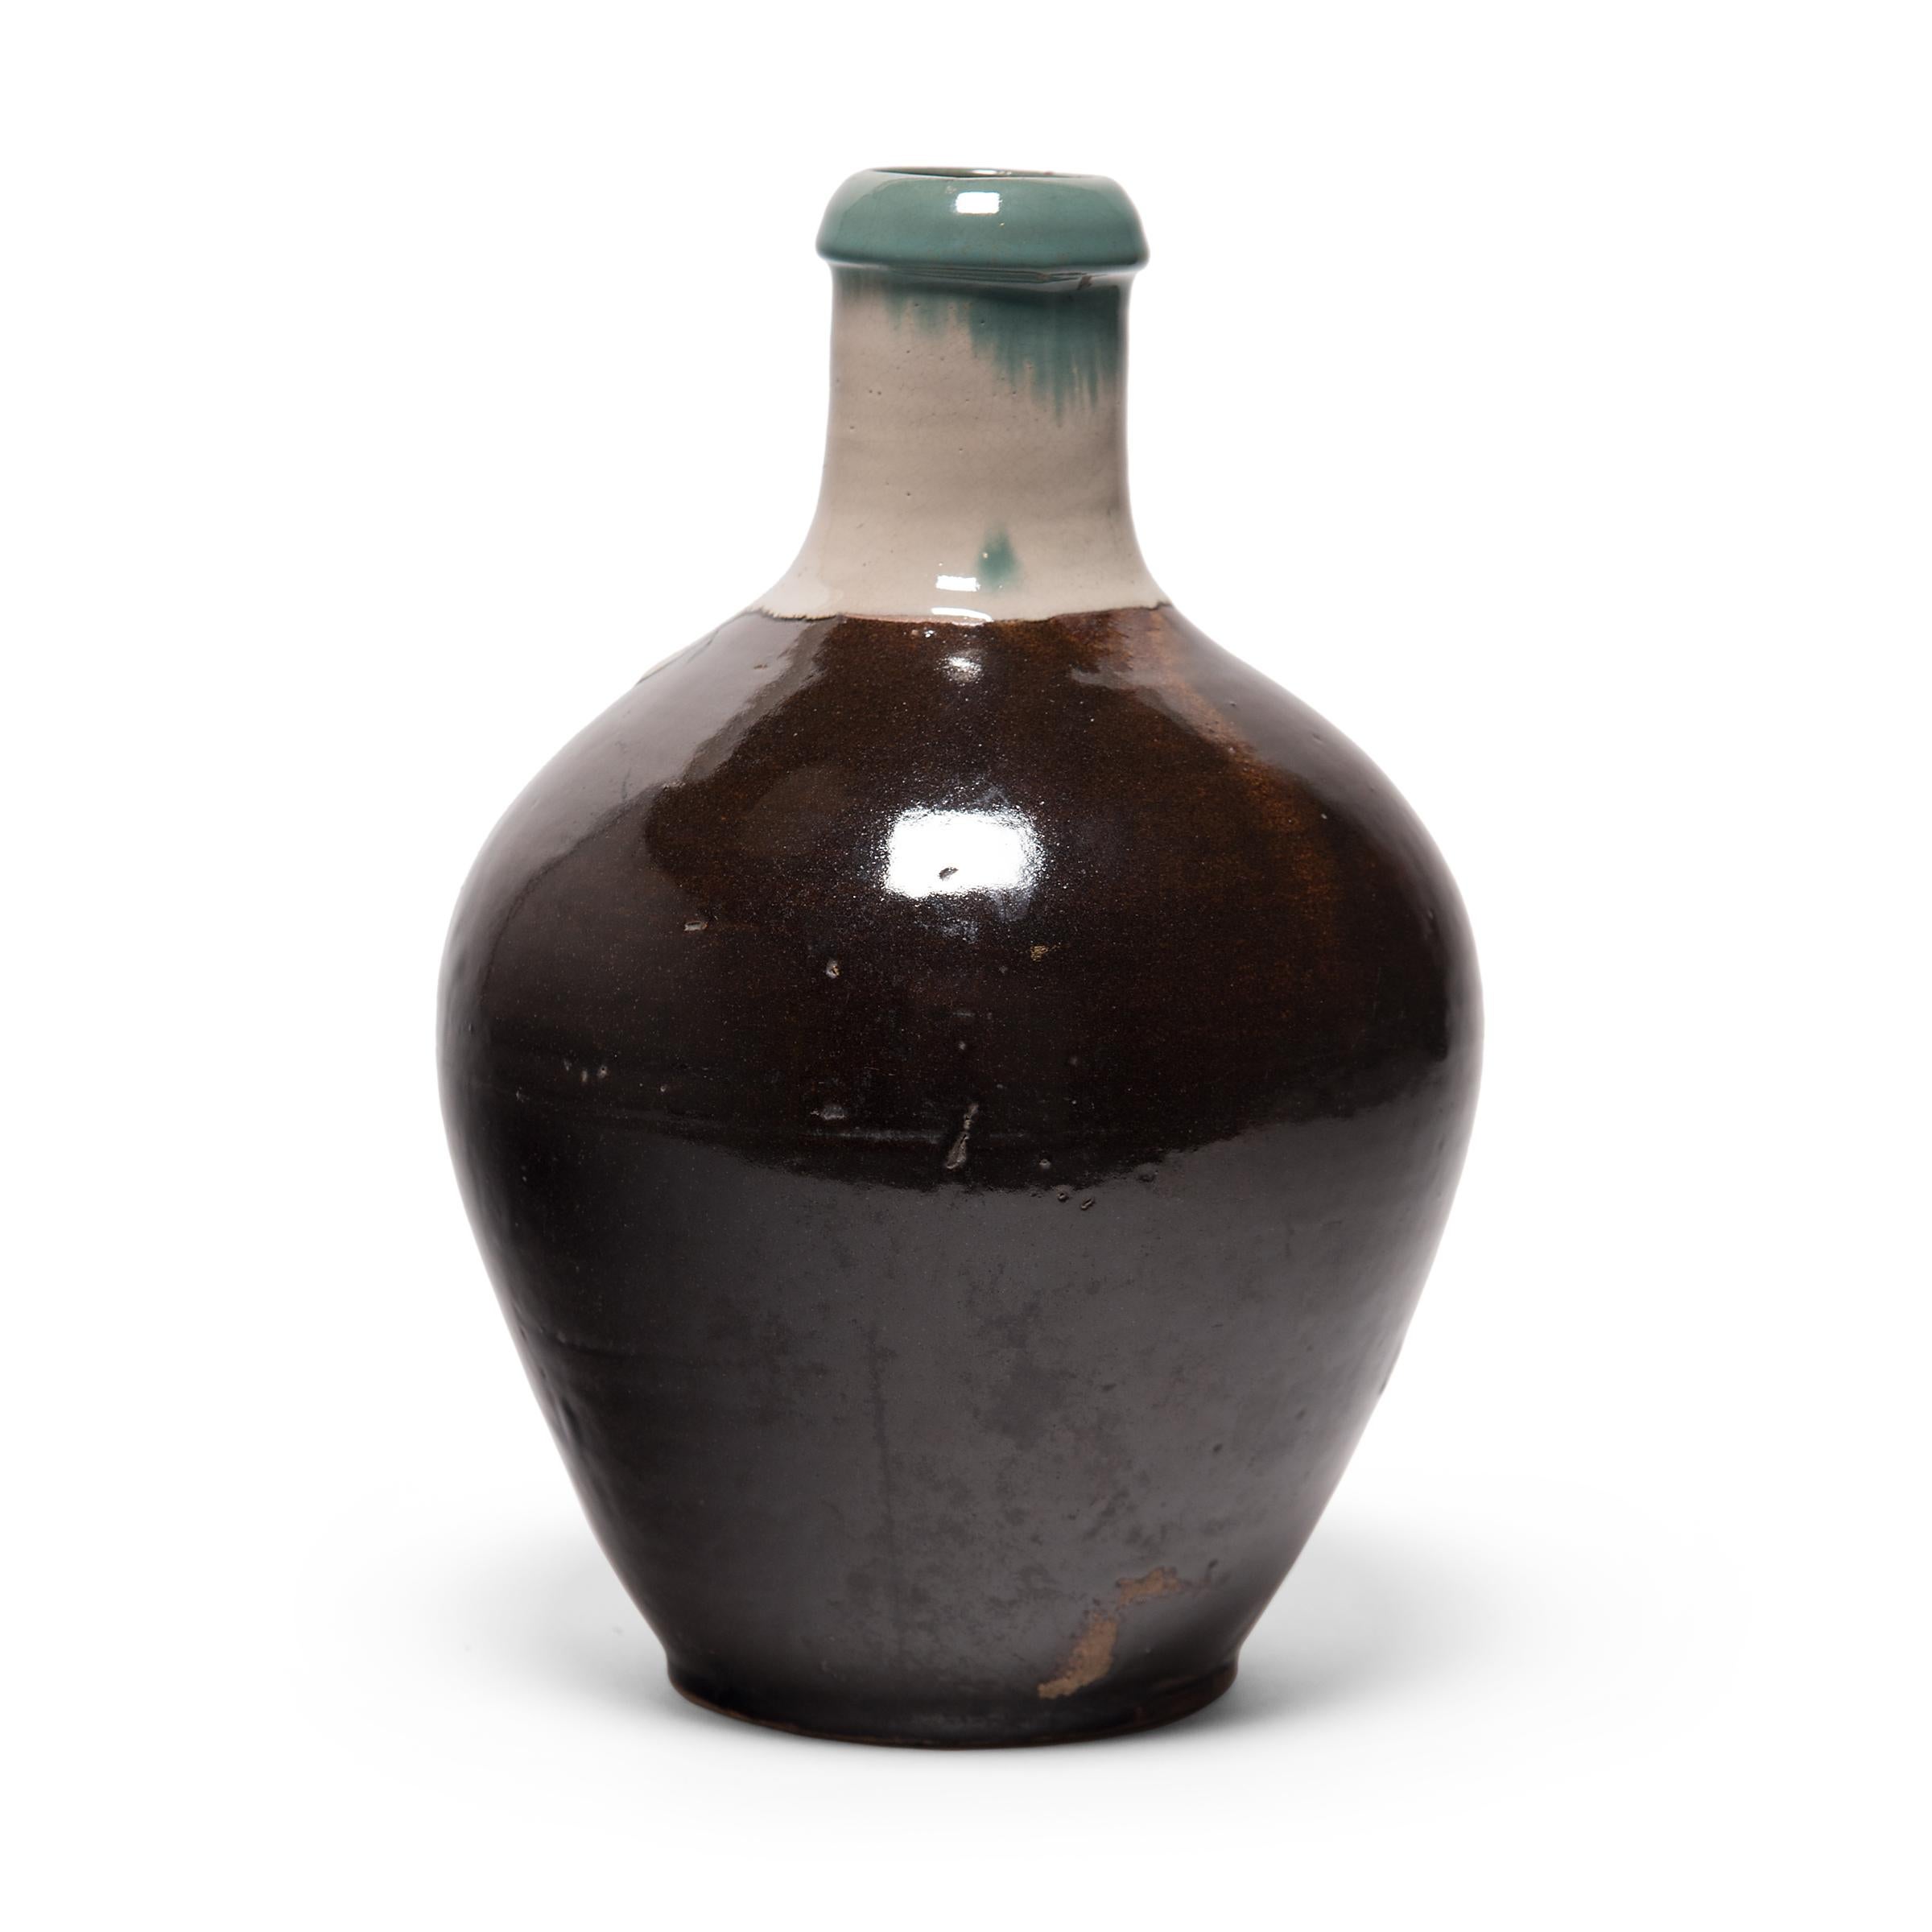 This unusual bottleneck jar is a late-Meiji era Japanese sake bottle, also known as tokkuri. Used to heat and serve sake, the ceramic bottle has a graceful, tapered form with wide shoulders and an elongated neck for conserving heat. A dark brown